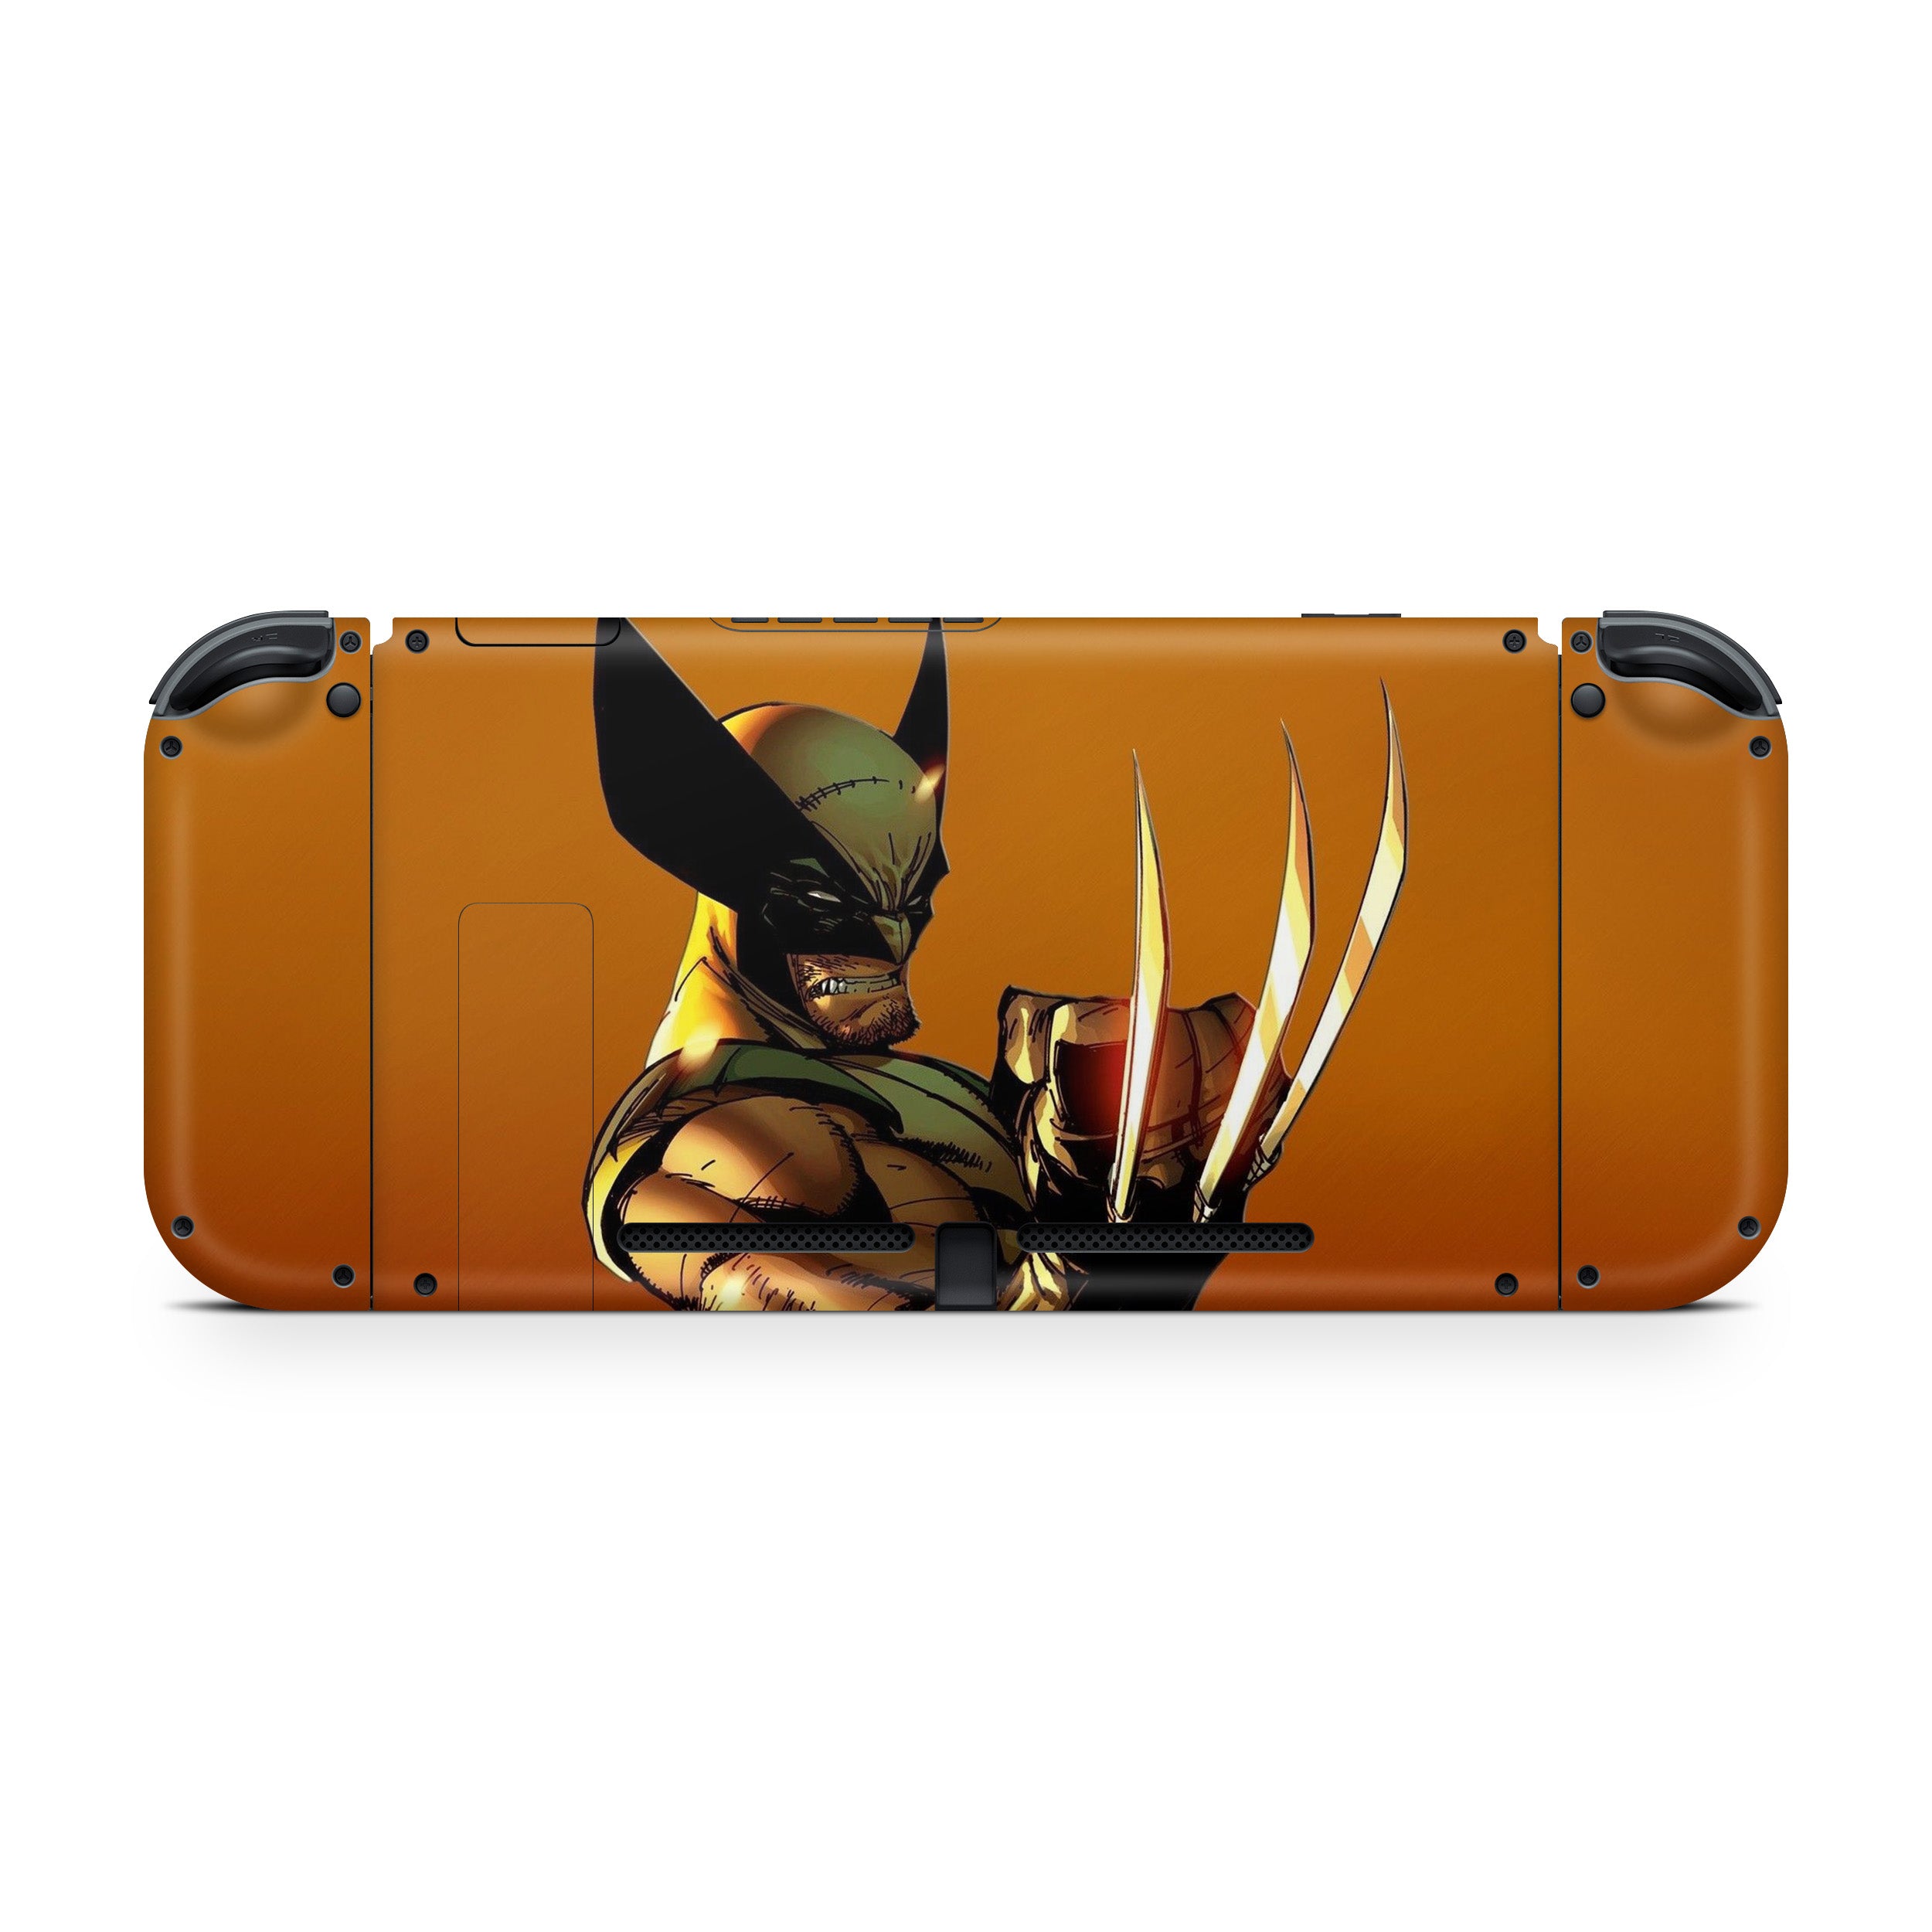 A video game skin featuring a Marvel X Men Wolverine design for the Nintendo Switch.